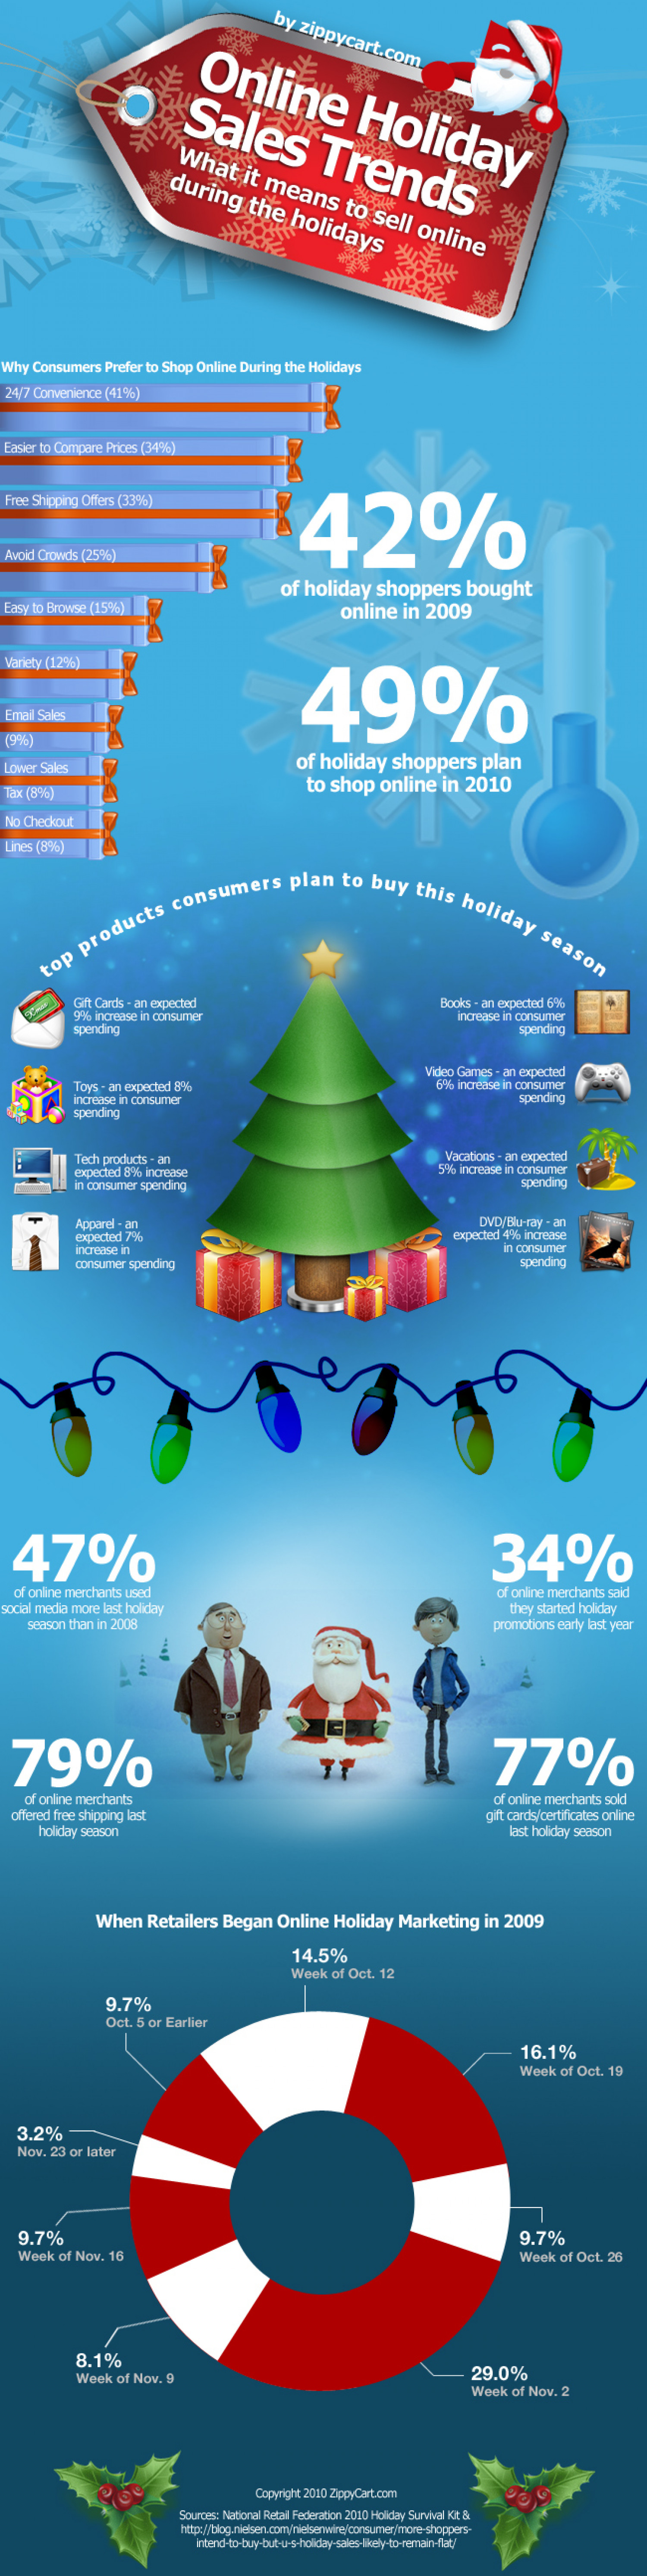 Online Holiday Sales Trends Infographic